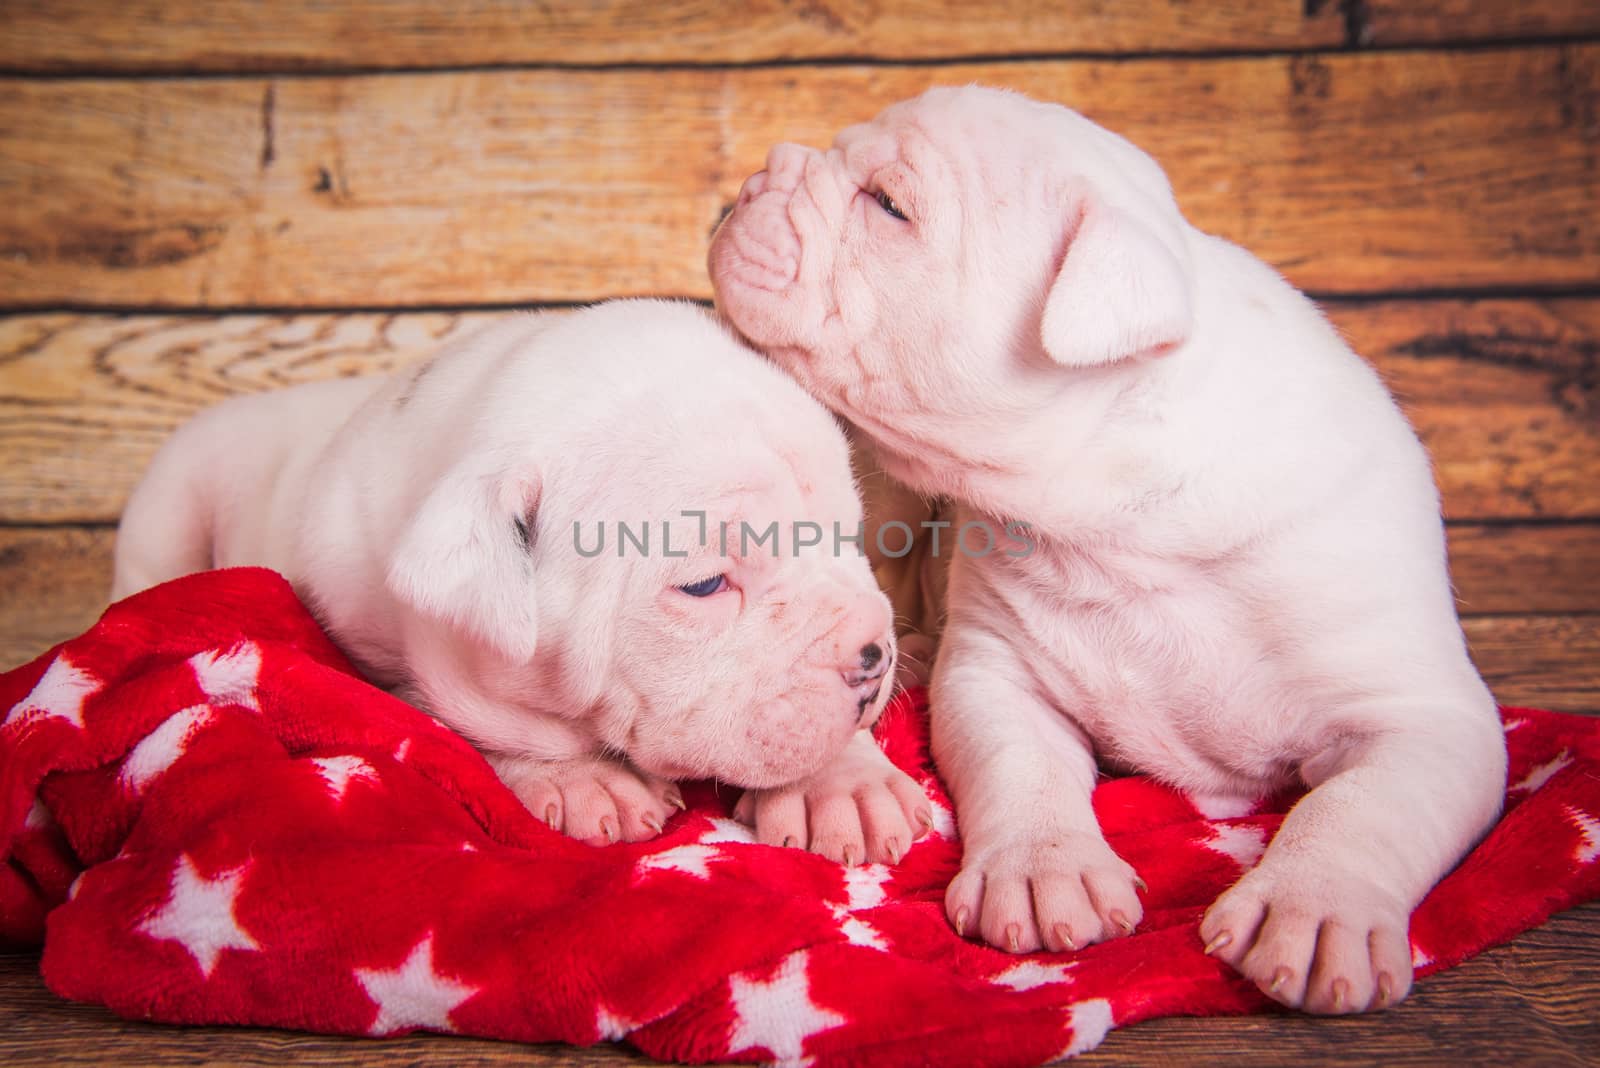 Two Funny American Bulldog puppies dogs are sleeping. Christmas or New Year background